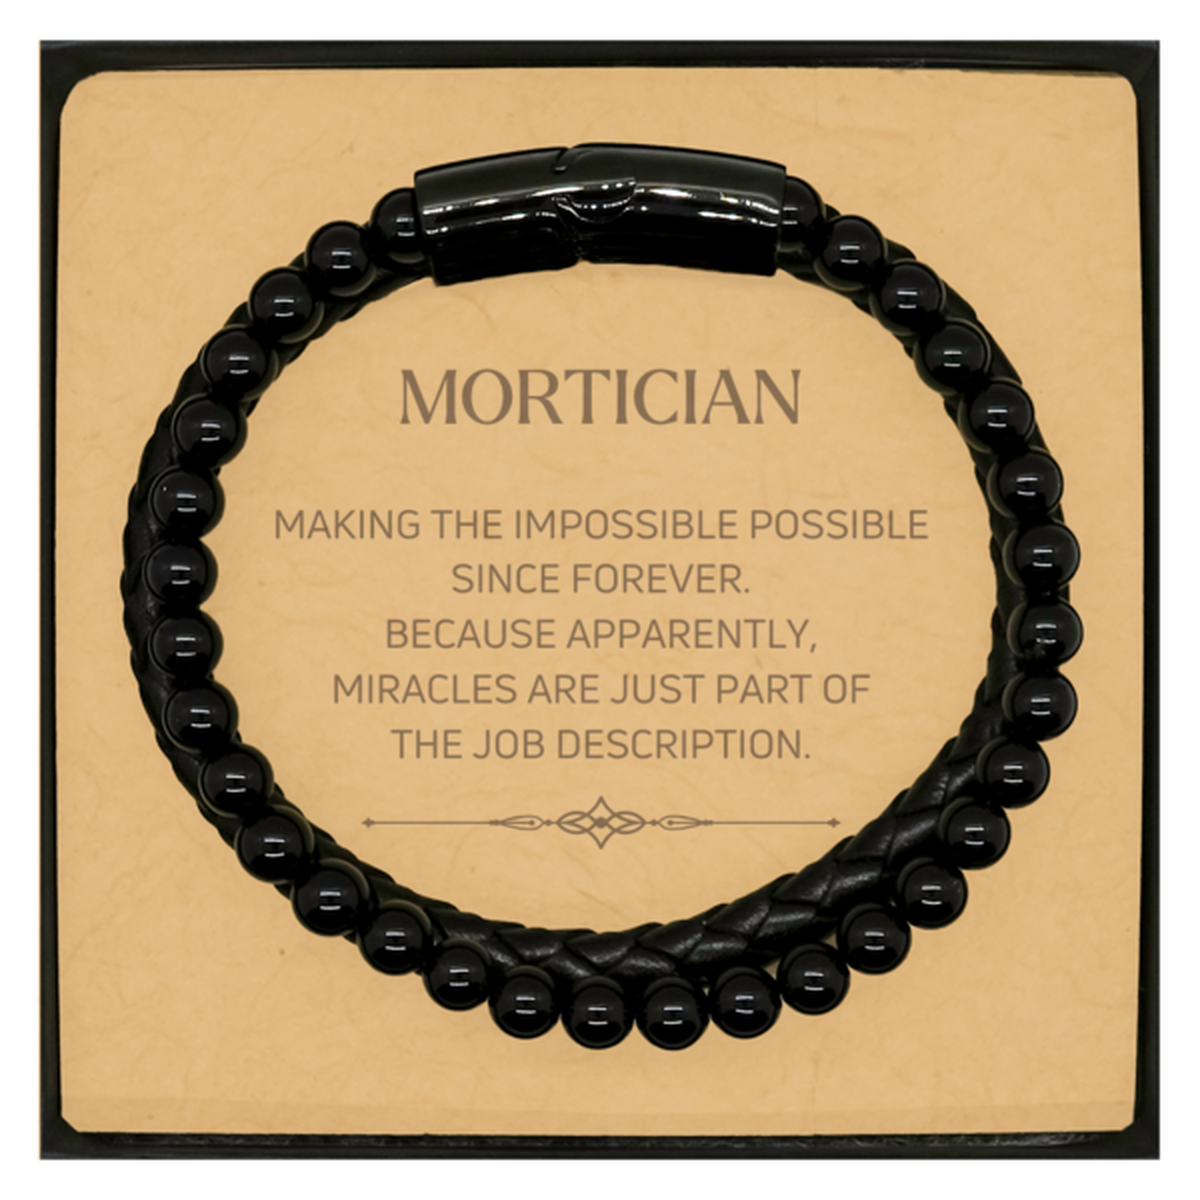 Funny Mortician Gifts, Miracles are just part of the job description, Inspirational Birthday Christmas Stone Leather Bracelets For Mortician, Men, Women, Coworkers, Friends, Boss